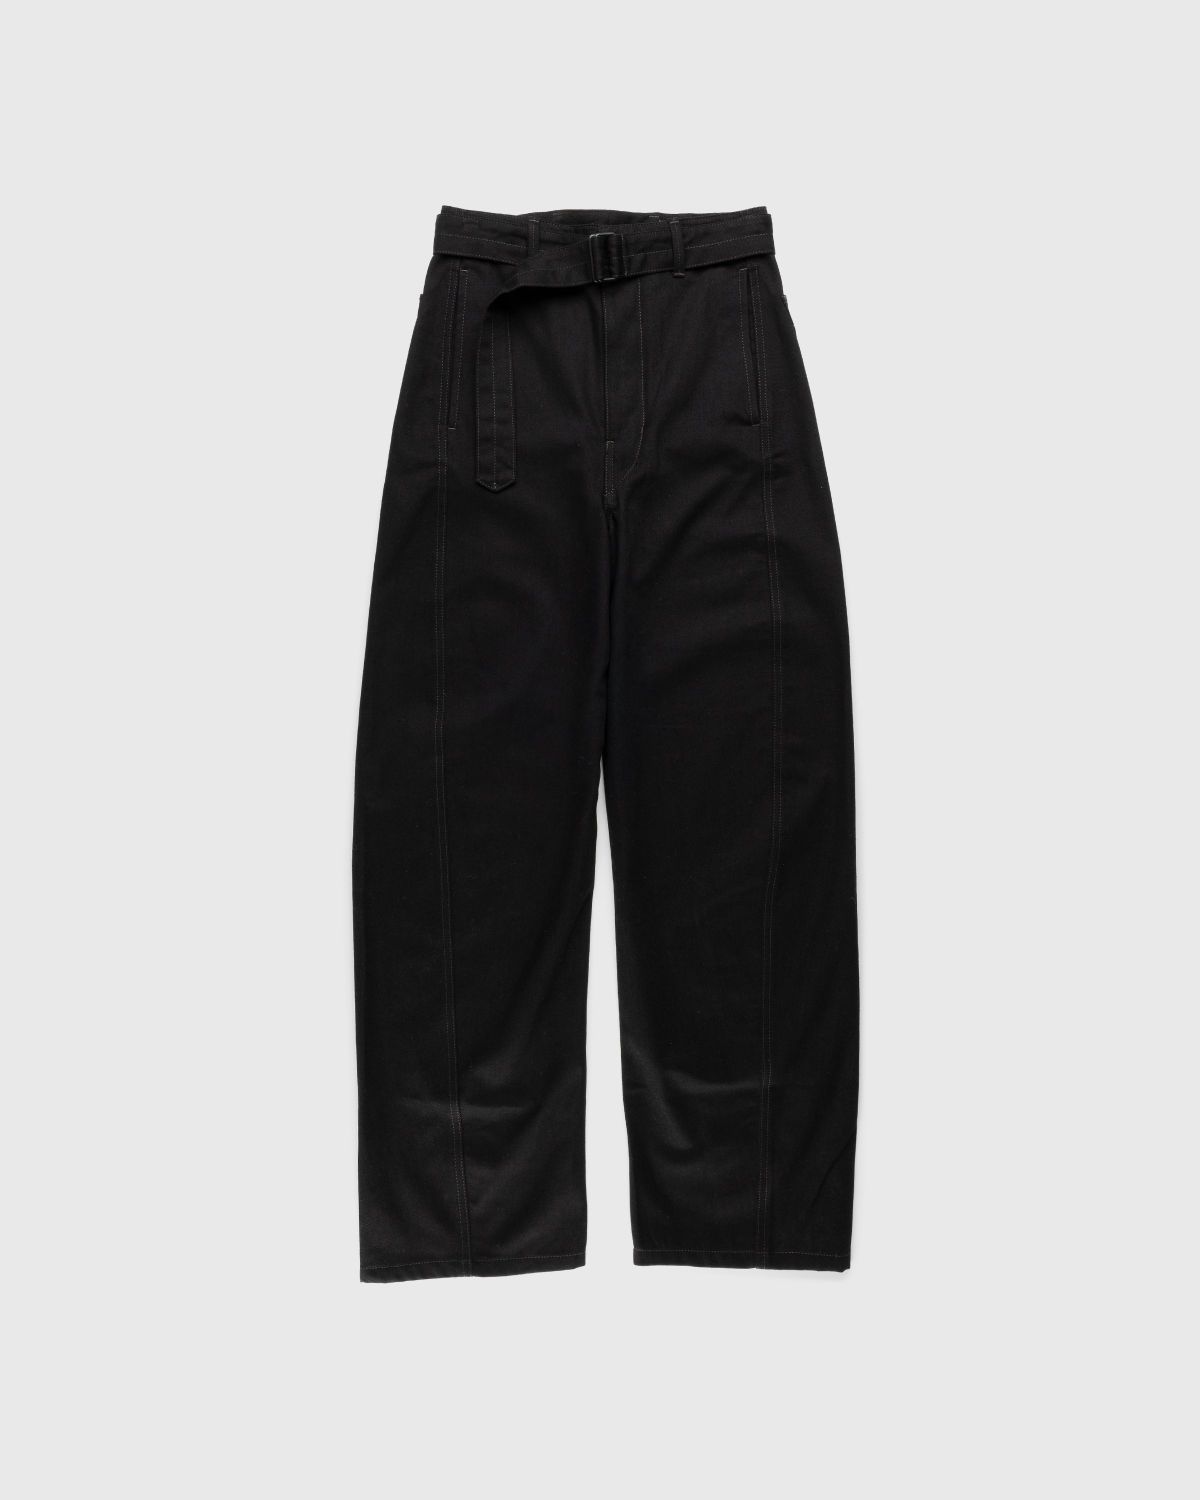 Lemaire – Twisted Belted Pants Black - Trousers - Black - Image 1